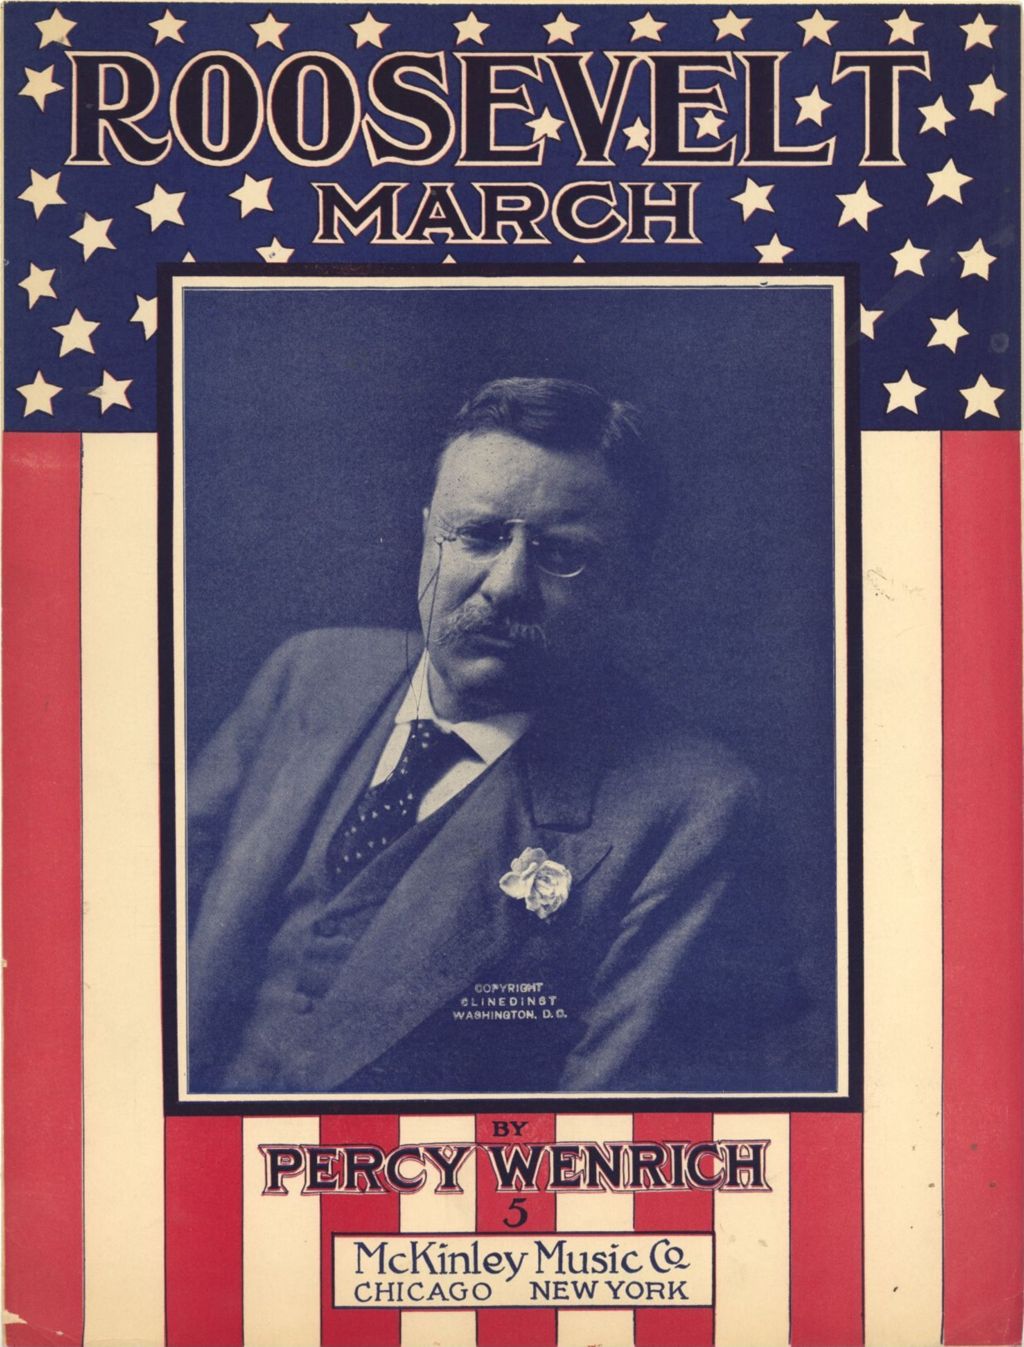 Miniature of Roosevelt March